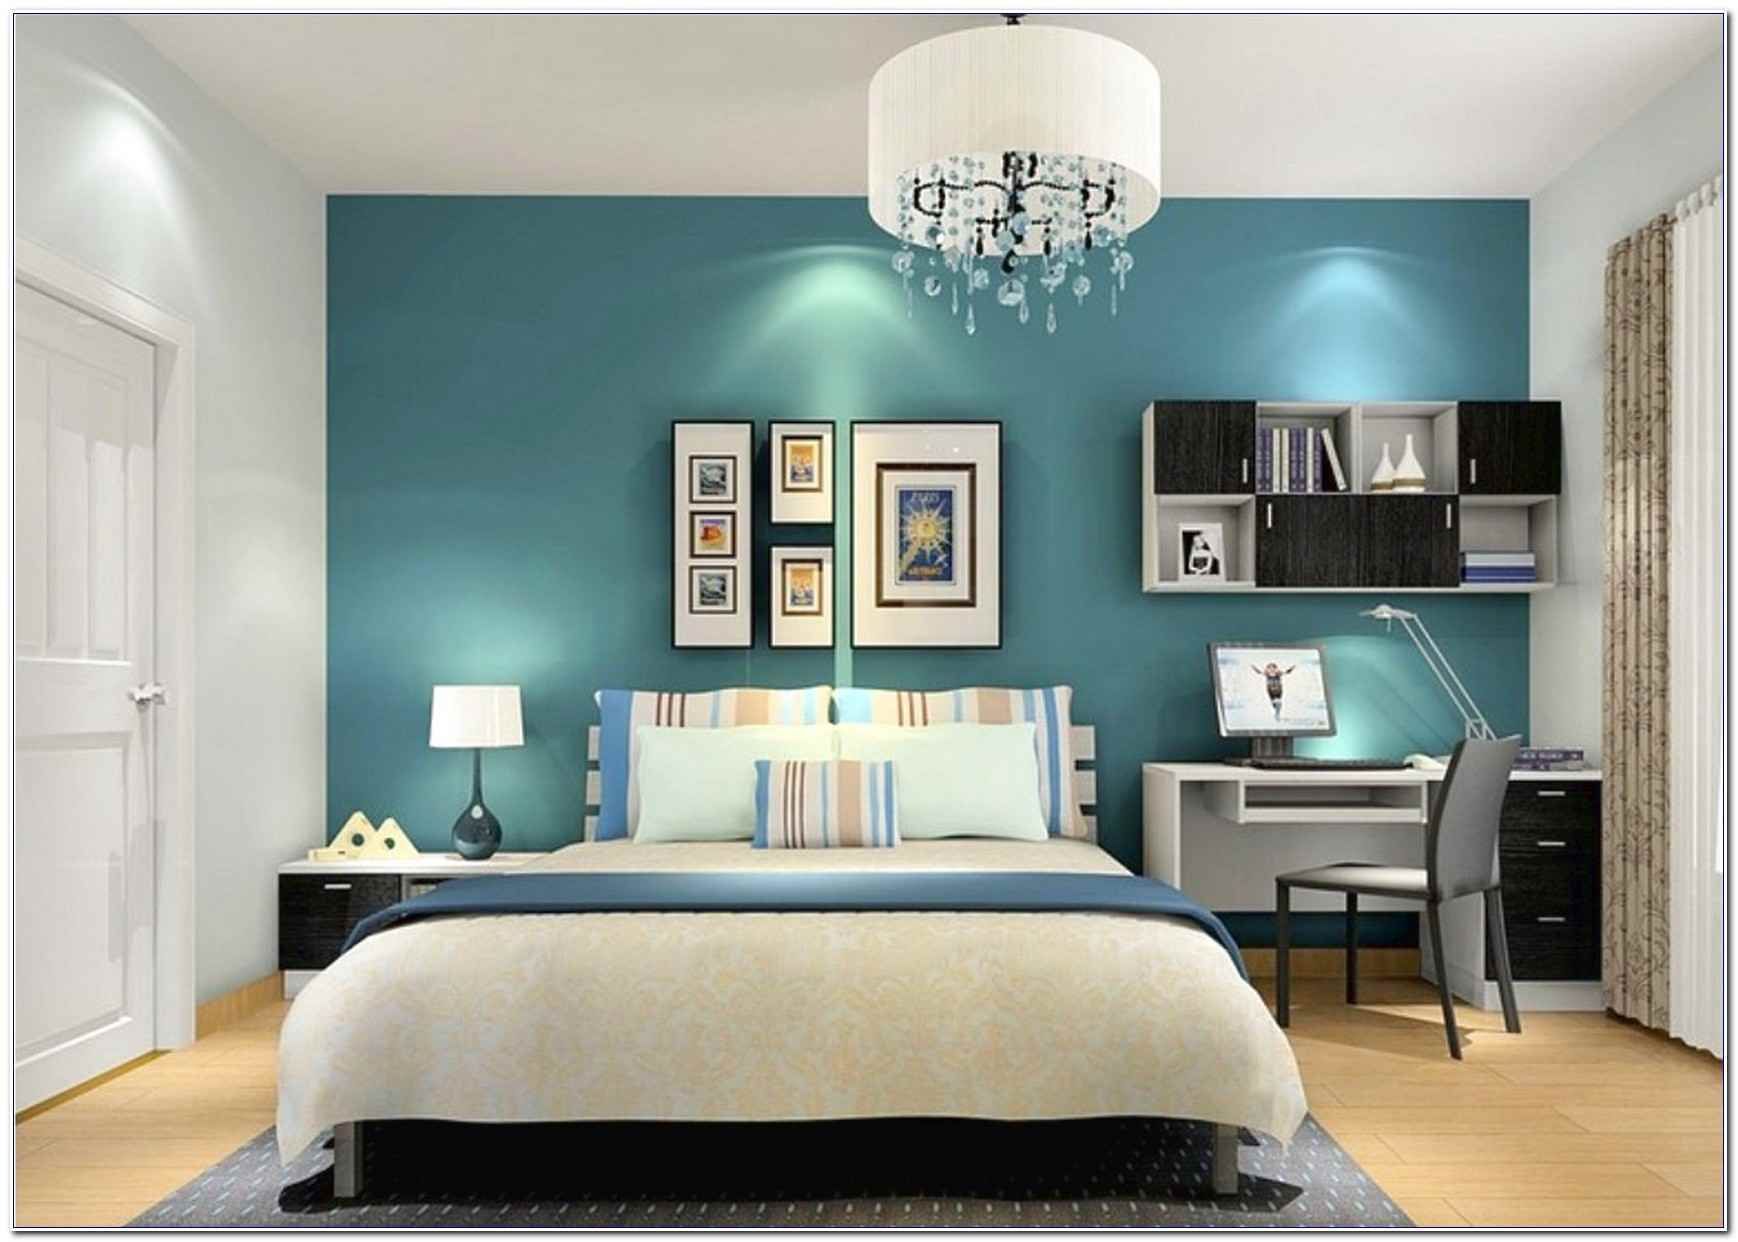 Teal and white bedroom decor